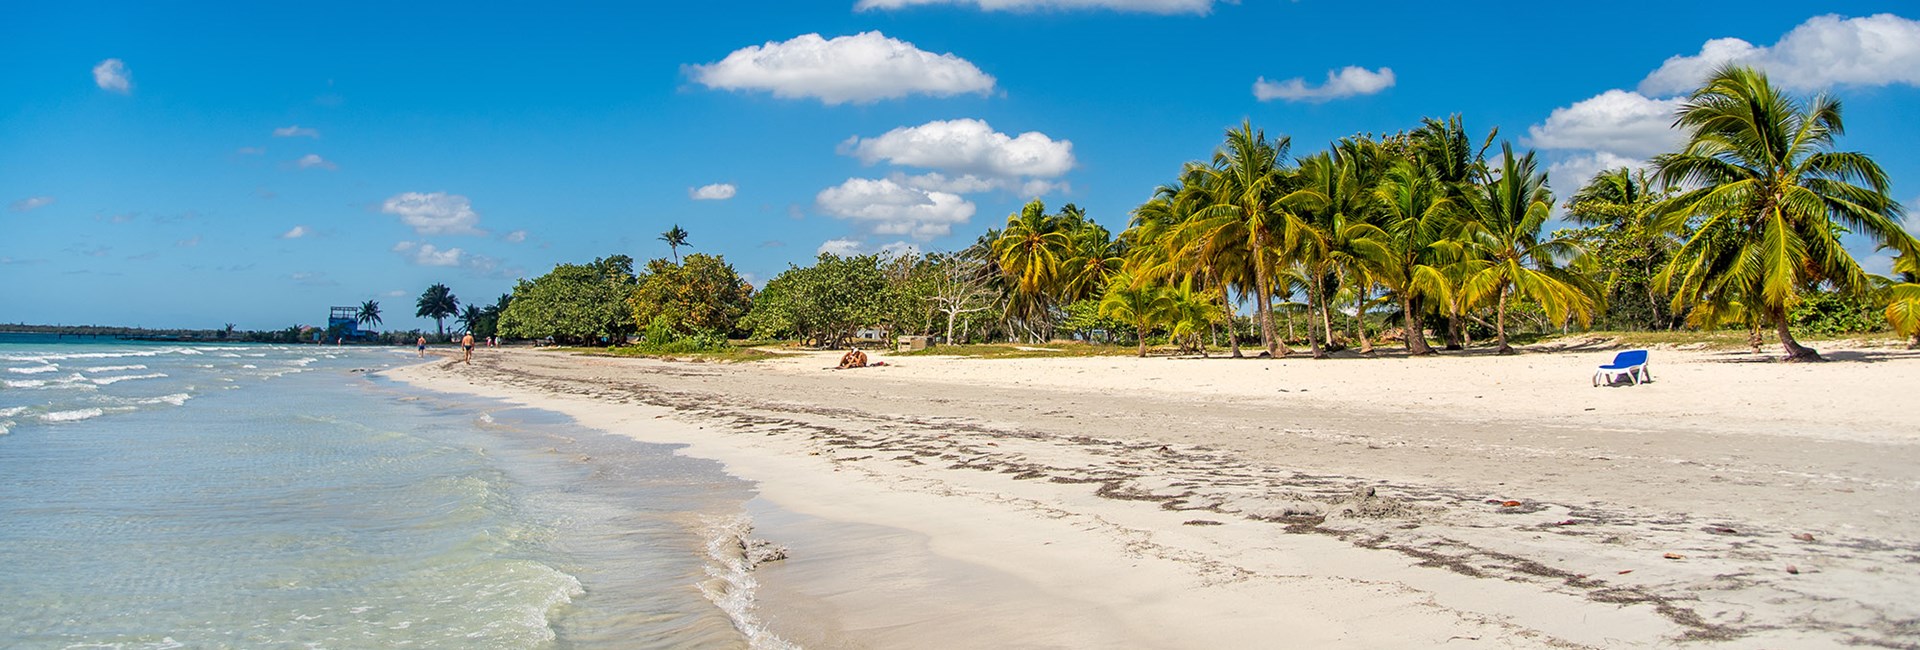 Natural tropical white sand beach lined with a forest of palm trees